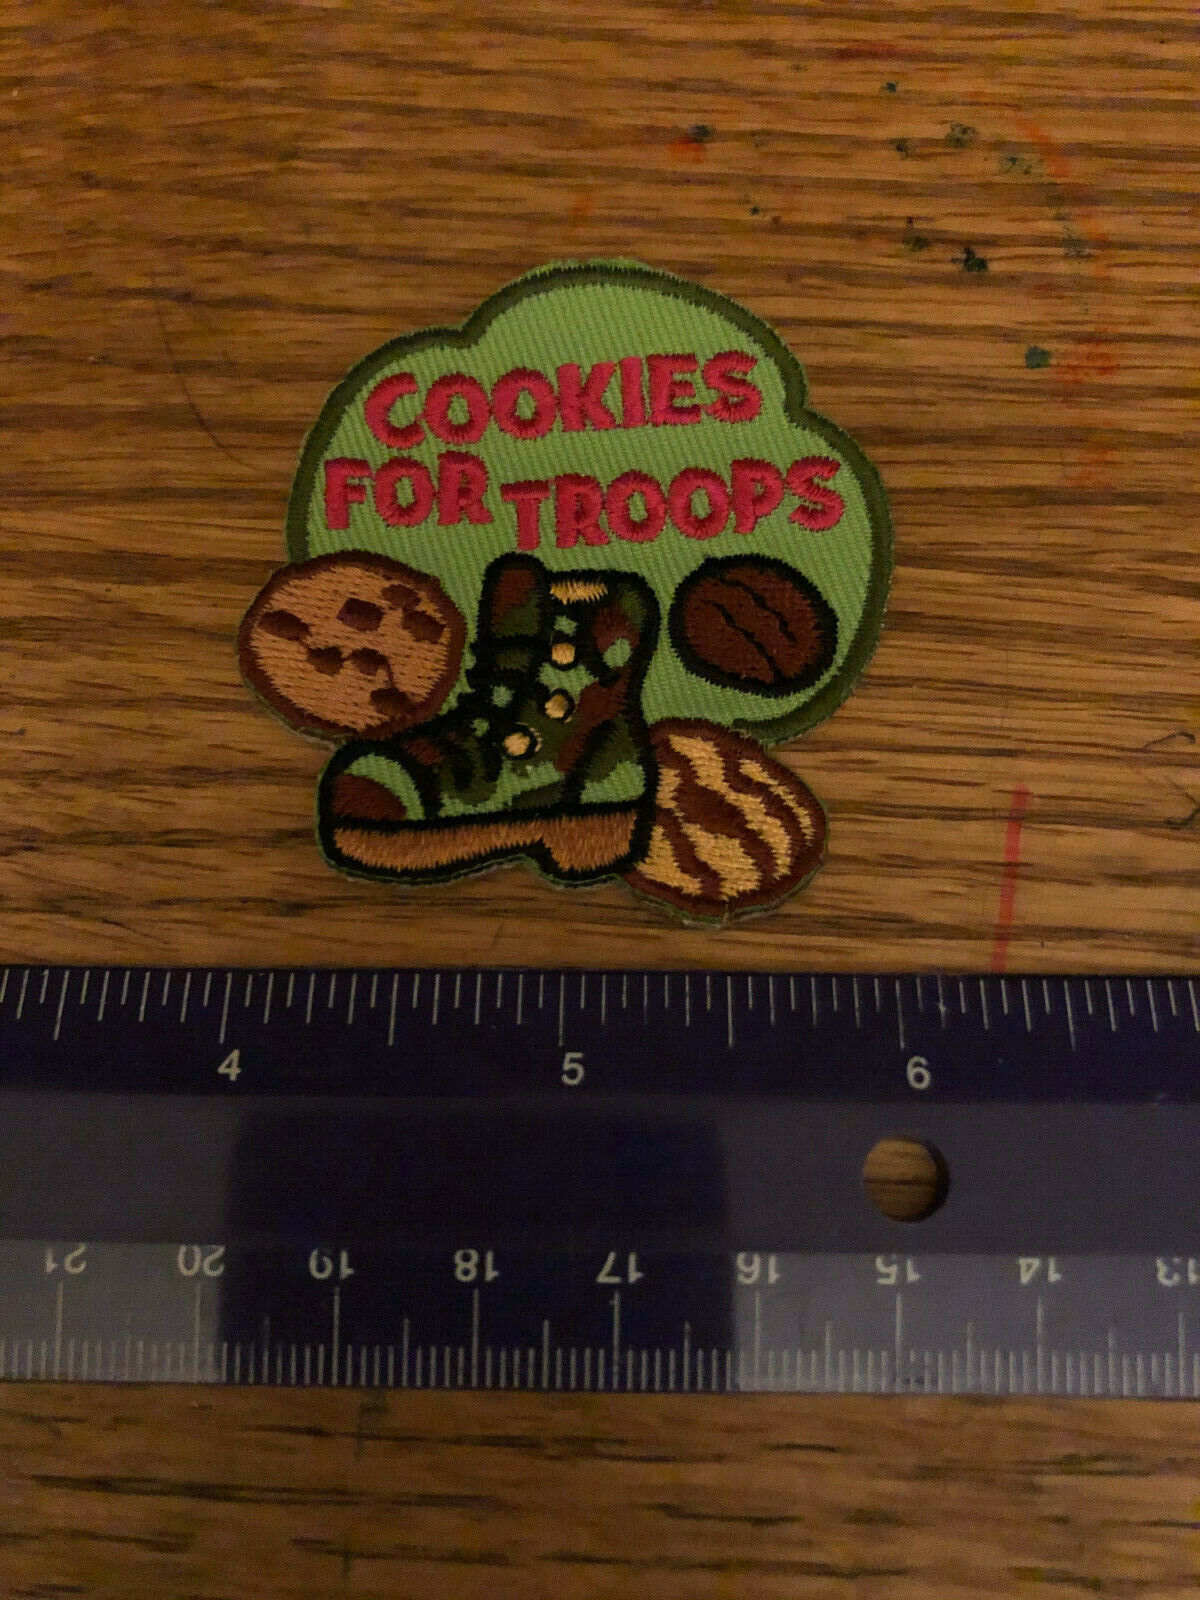 Cookies for troops fun patch scouts